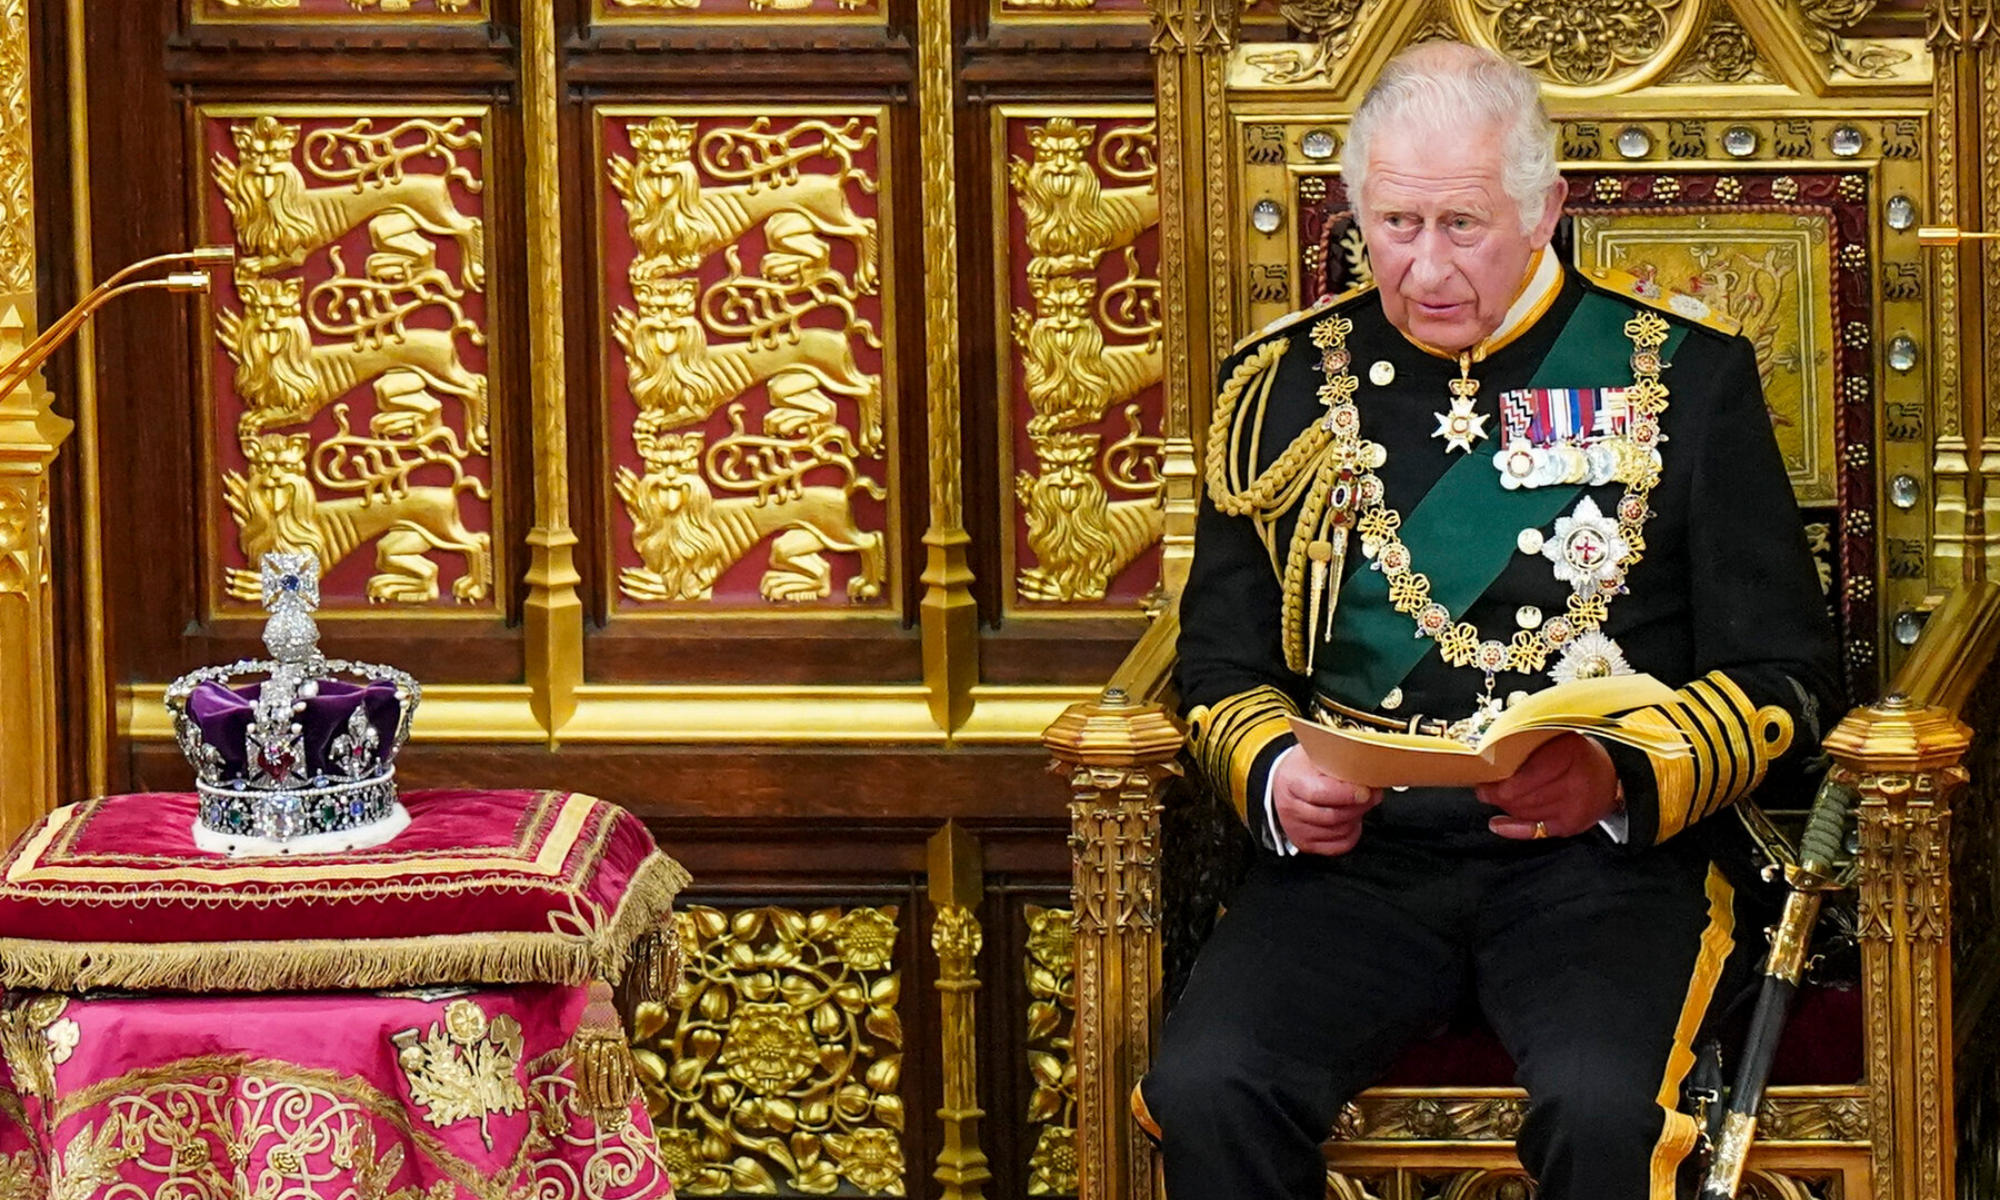 King Charles III ascends to the throne of the United Kingdom_40.1